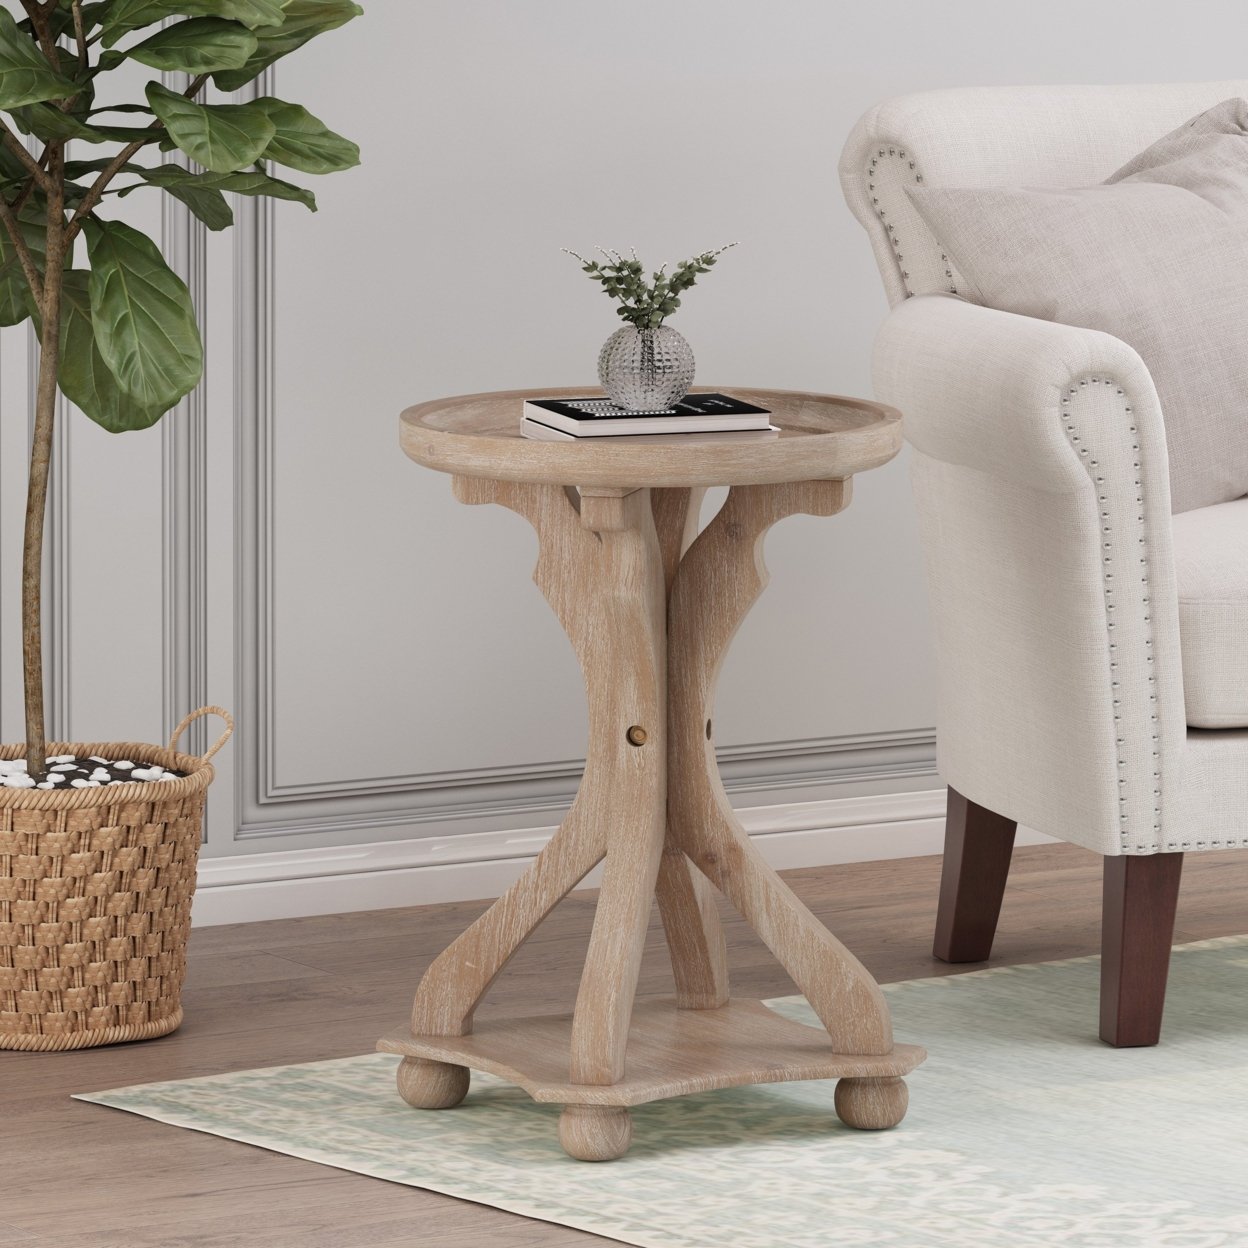 Ihana French Country Accent Table With Round Top - Distressed White/natural